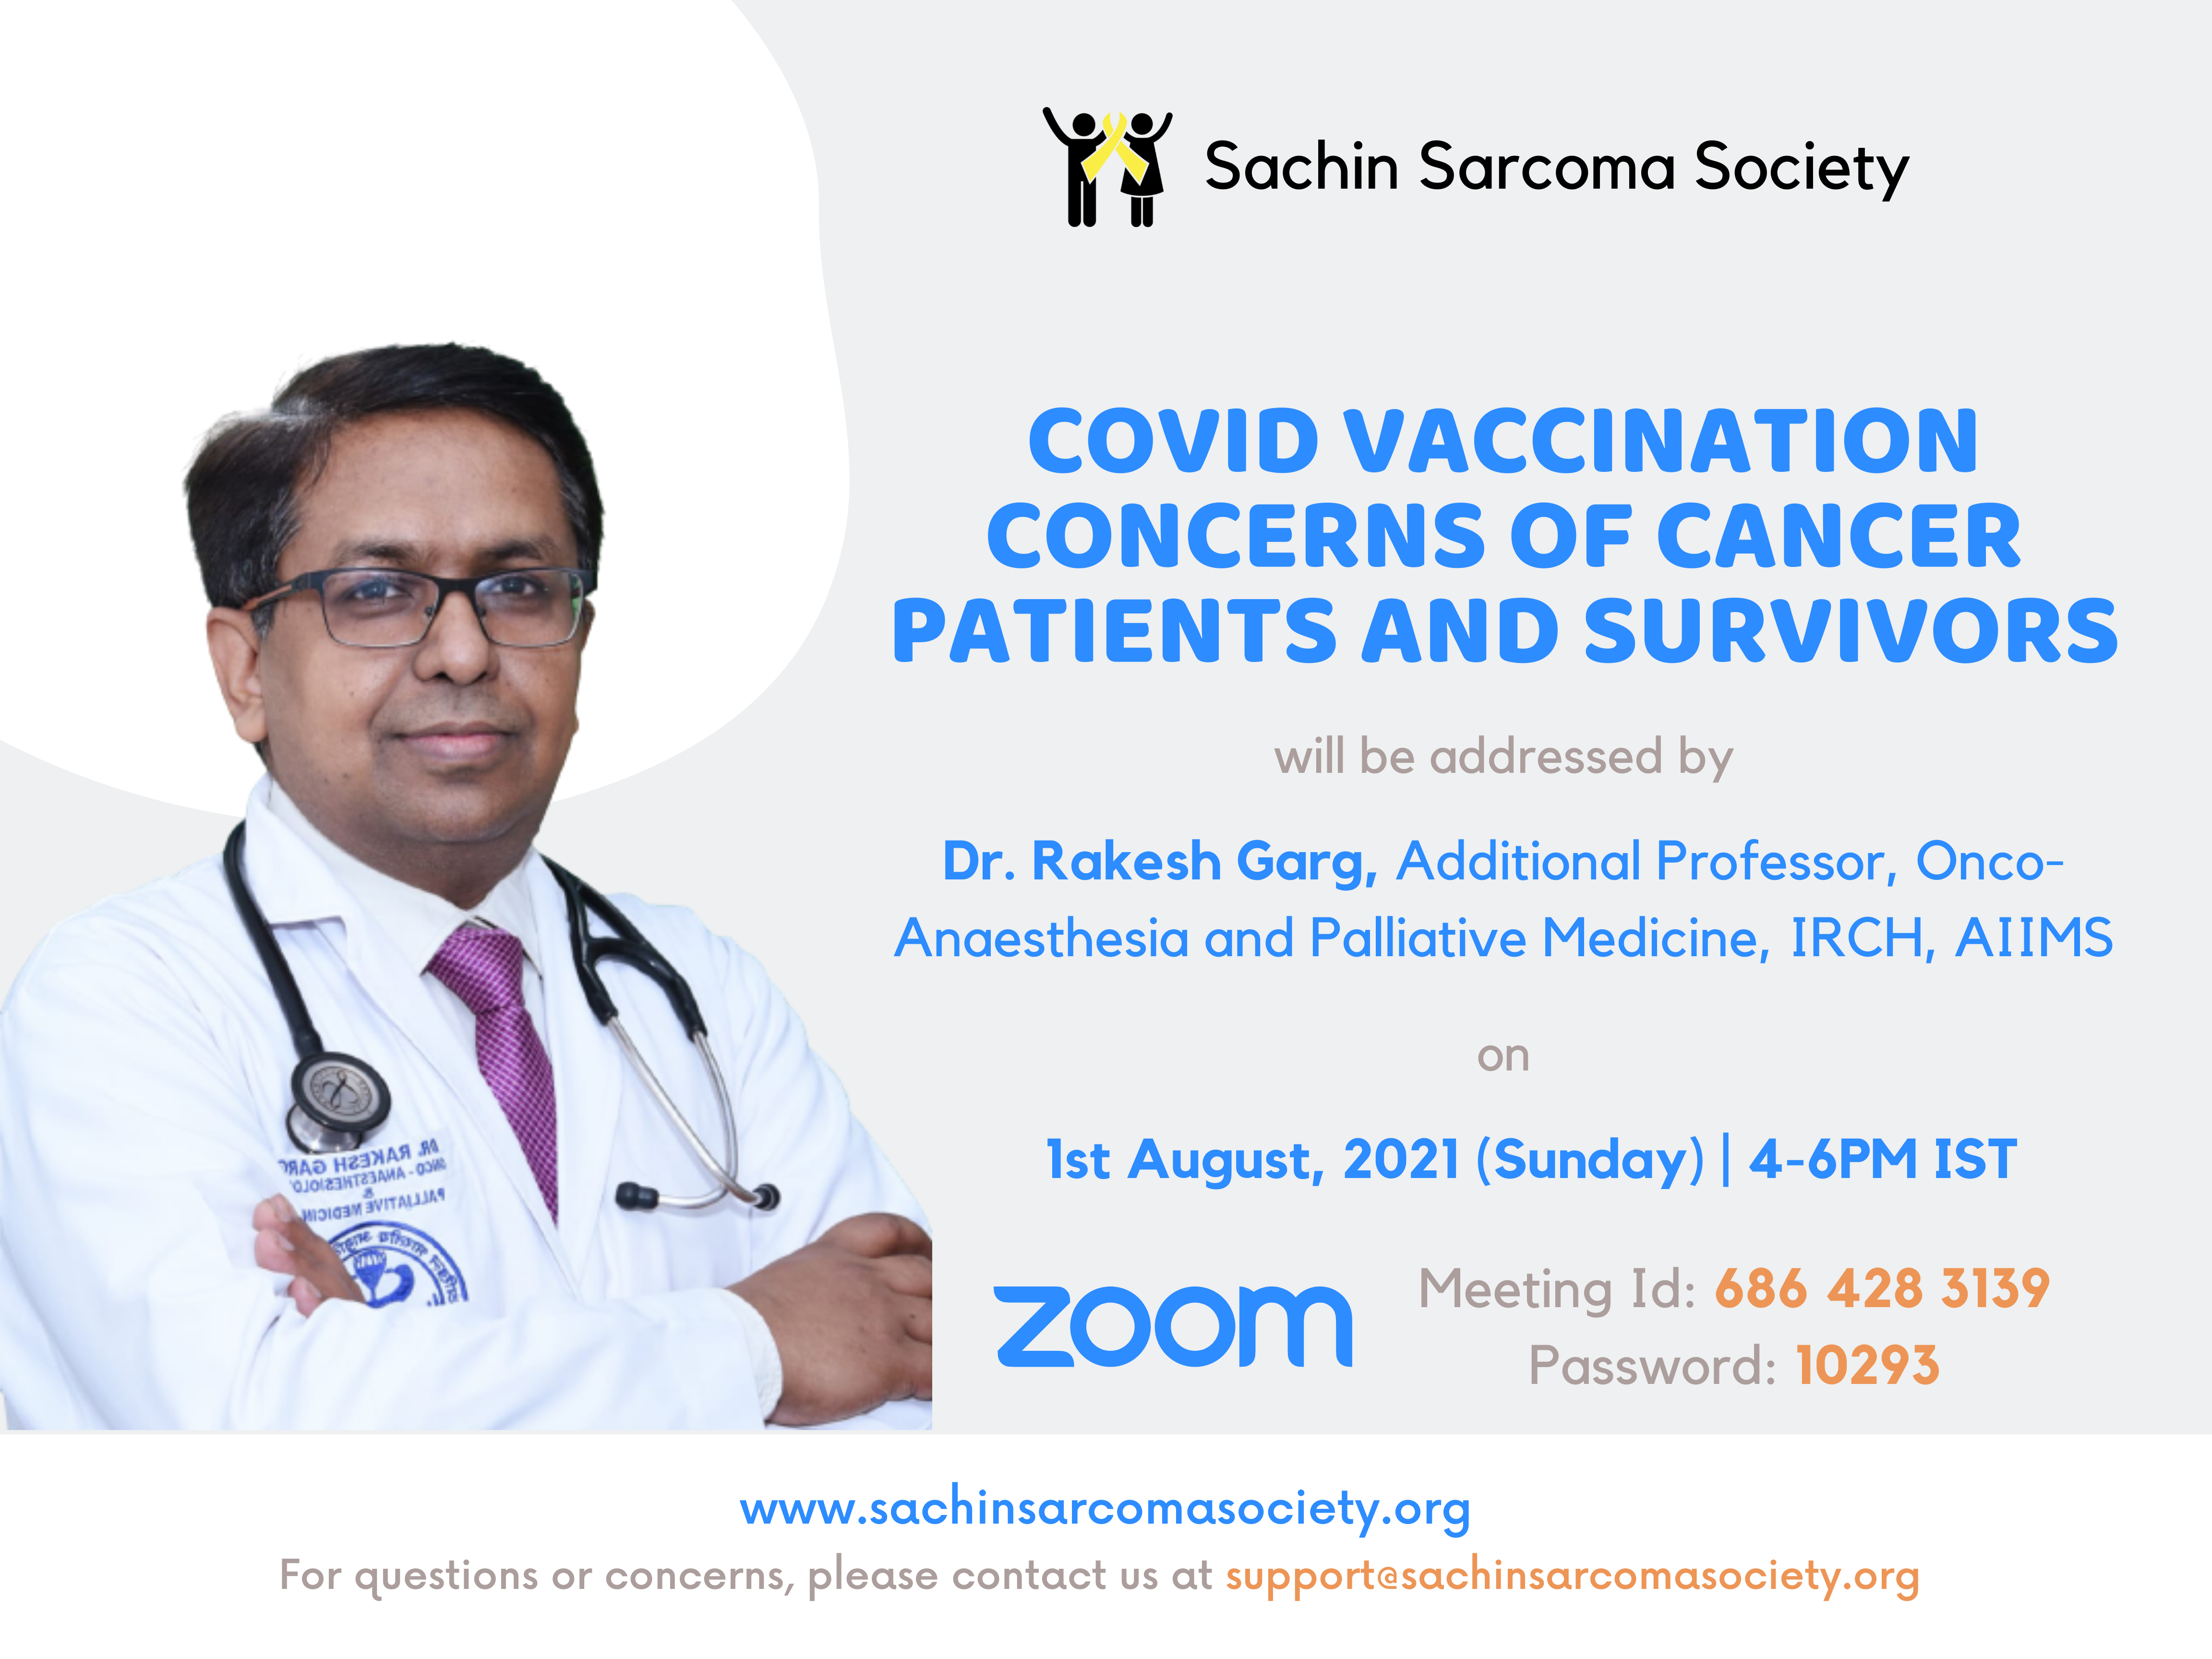 Covid Vaccination Concerns of Cancer Patients and survivors